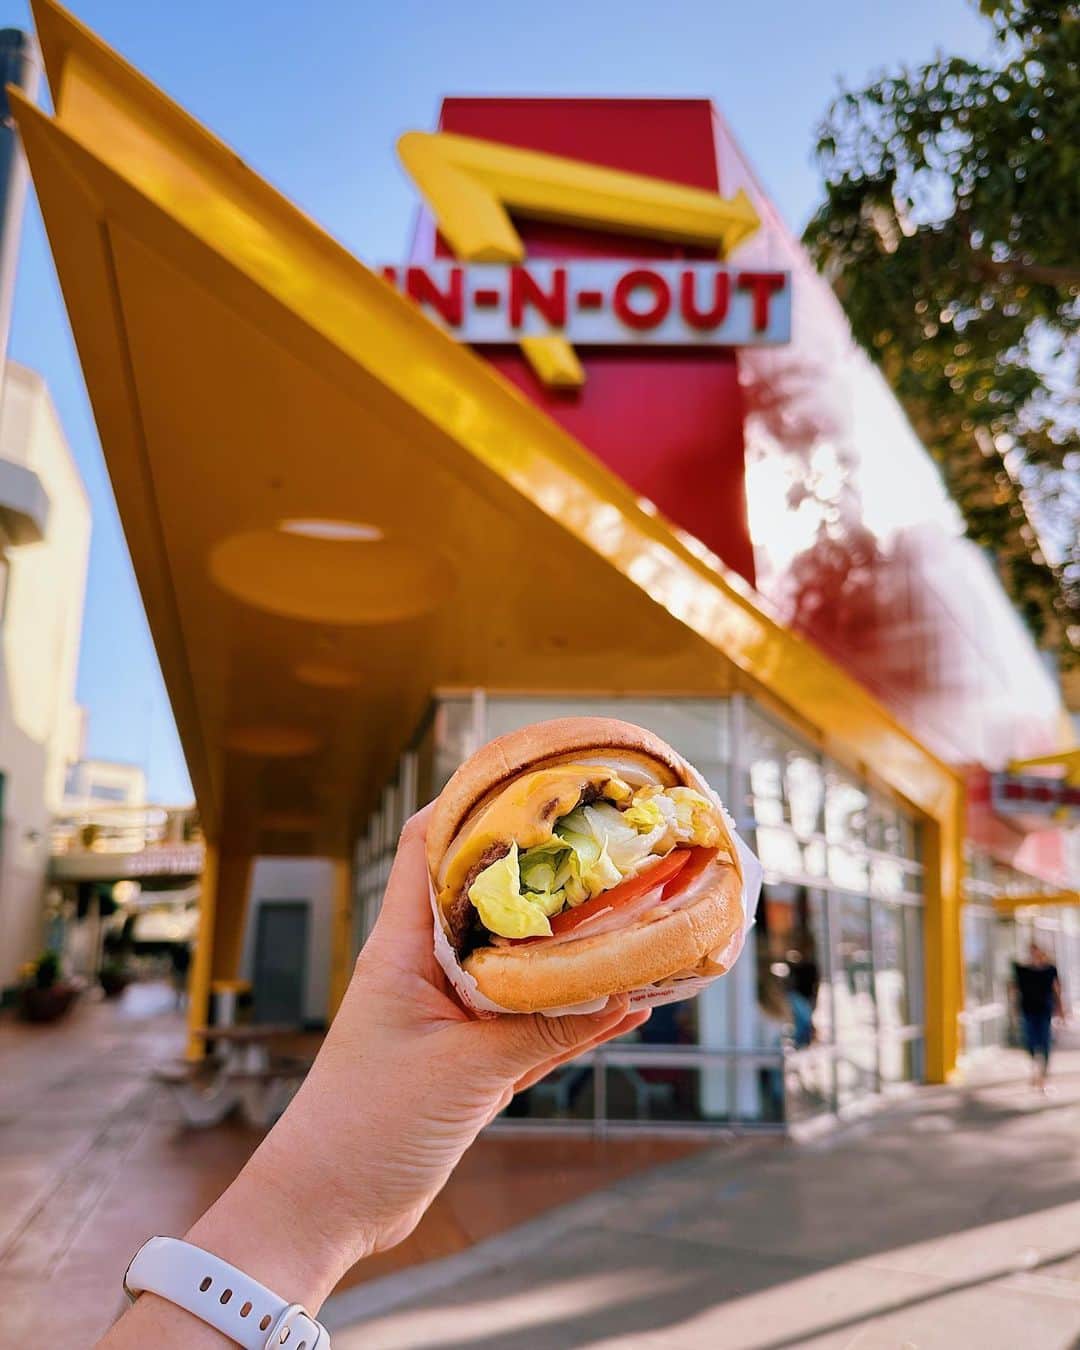 Girleatworldのインスタグラム：「Landed in California, immediately rushed to In-N-Out to relive my childhood favorite while basking in the golden cali sun 🥹 #🍔#🍟 #innout #innoutburger #california #shotoniphone」